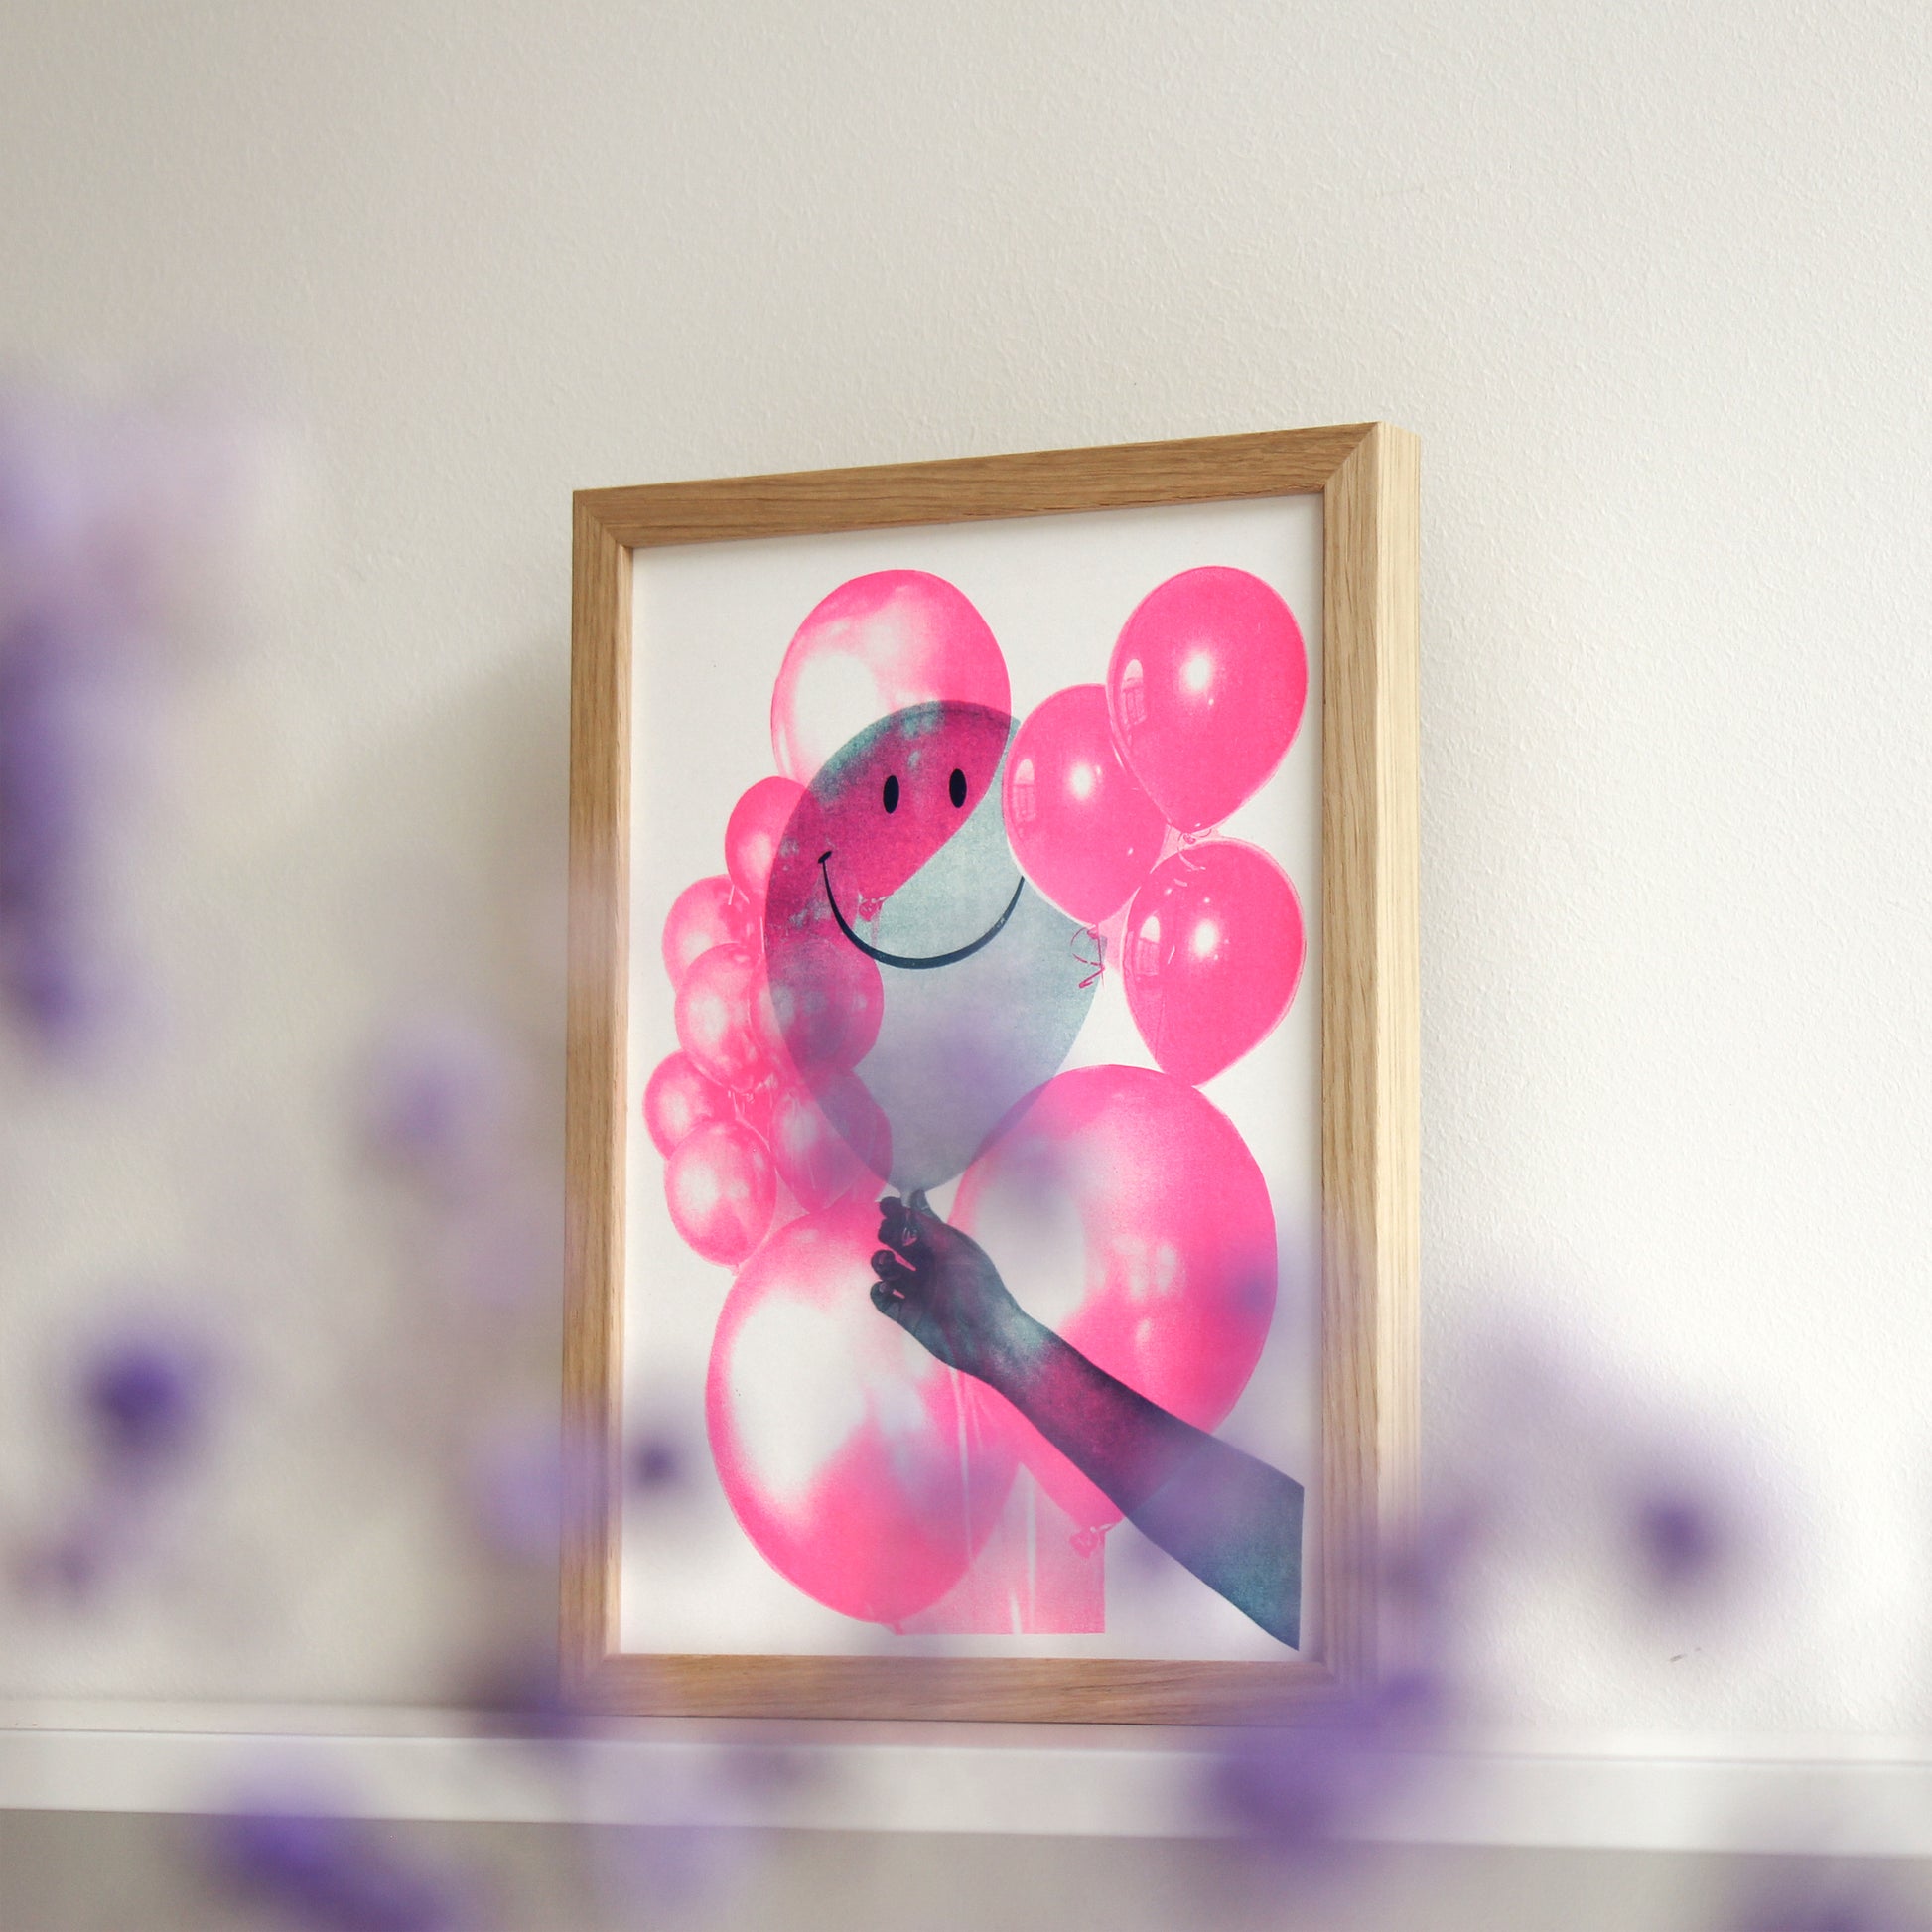 Kunst Poster Risographie) – Balloon\